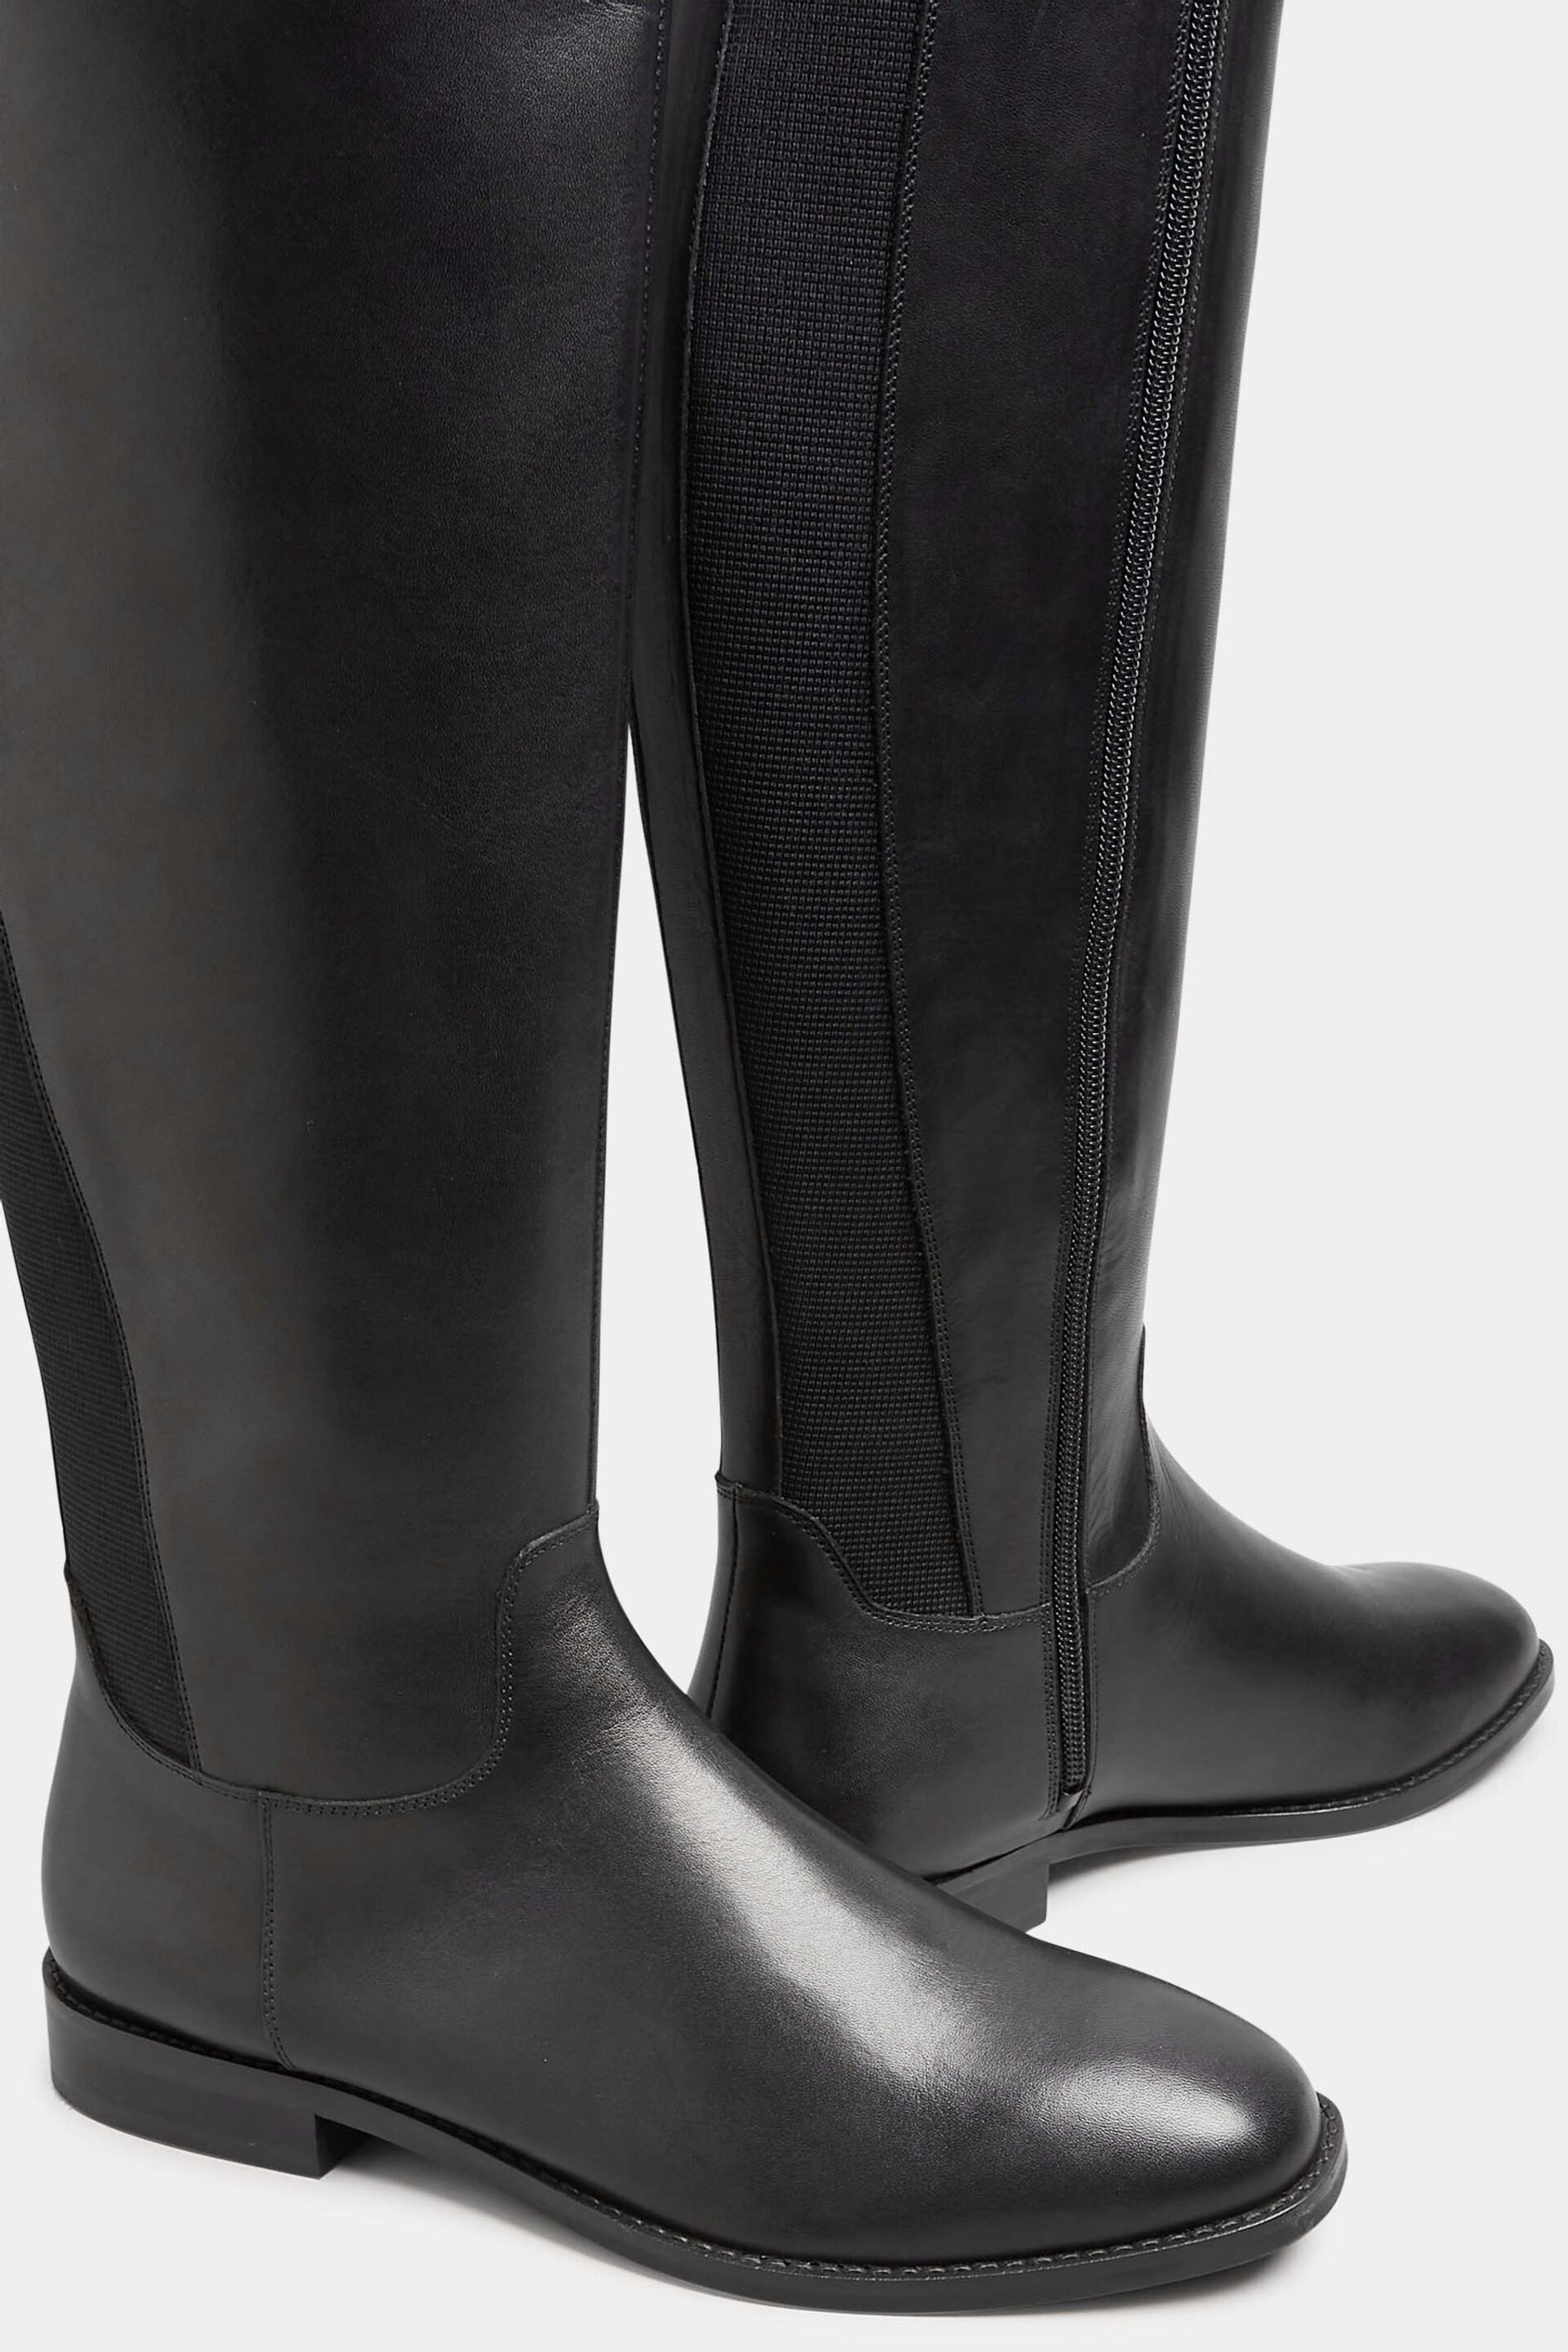 Long Tall Sally Black Leather Knee High Boots - Image 4 of 5